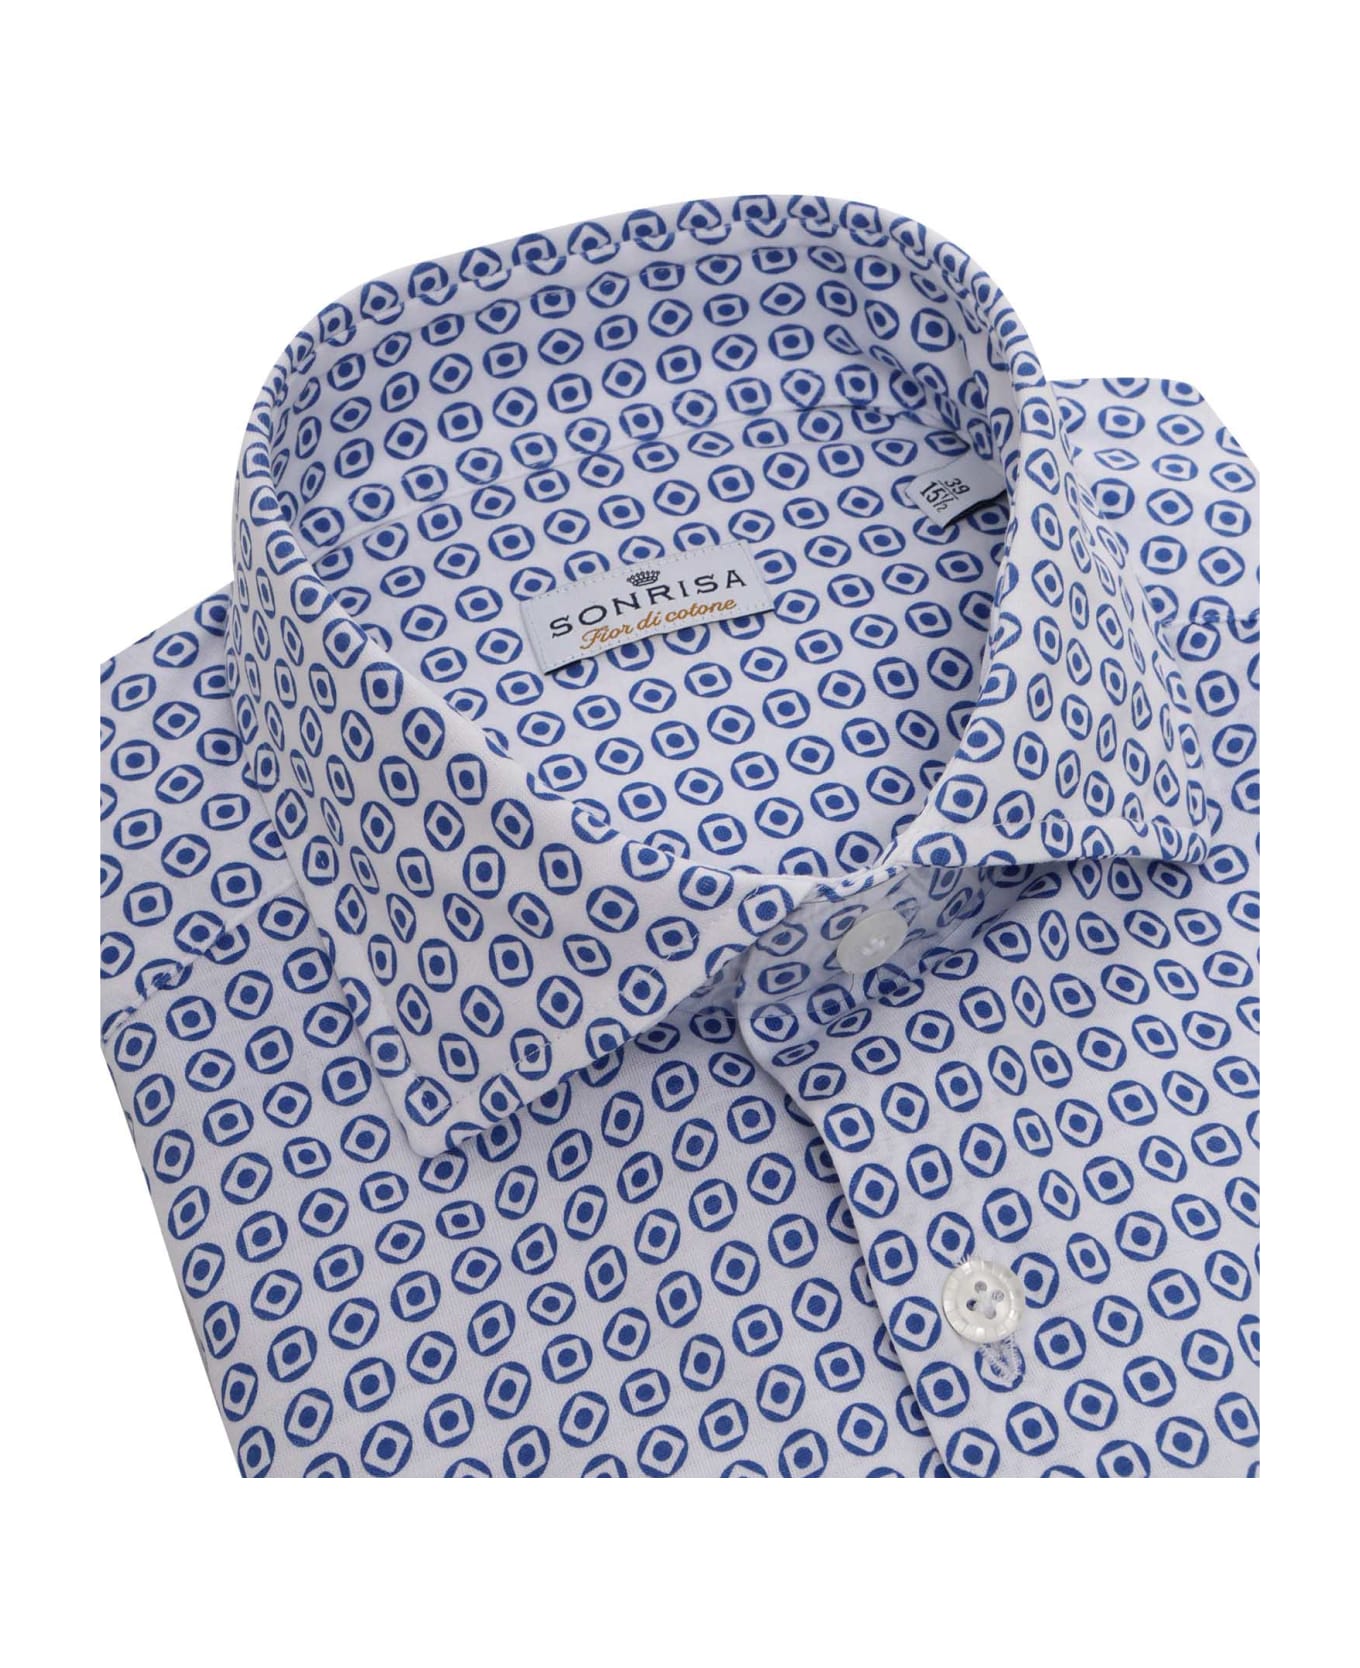 Sonrisa Shirt With Pattern - MULTICOLOR